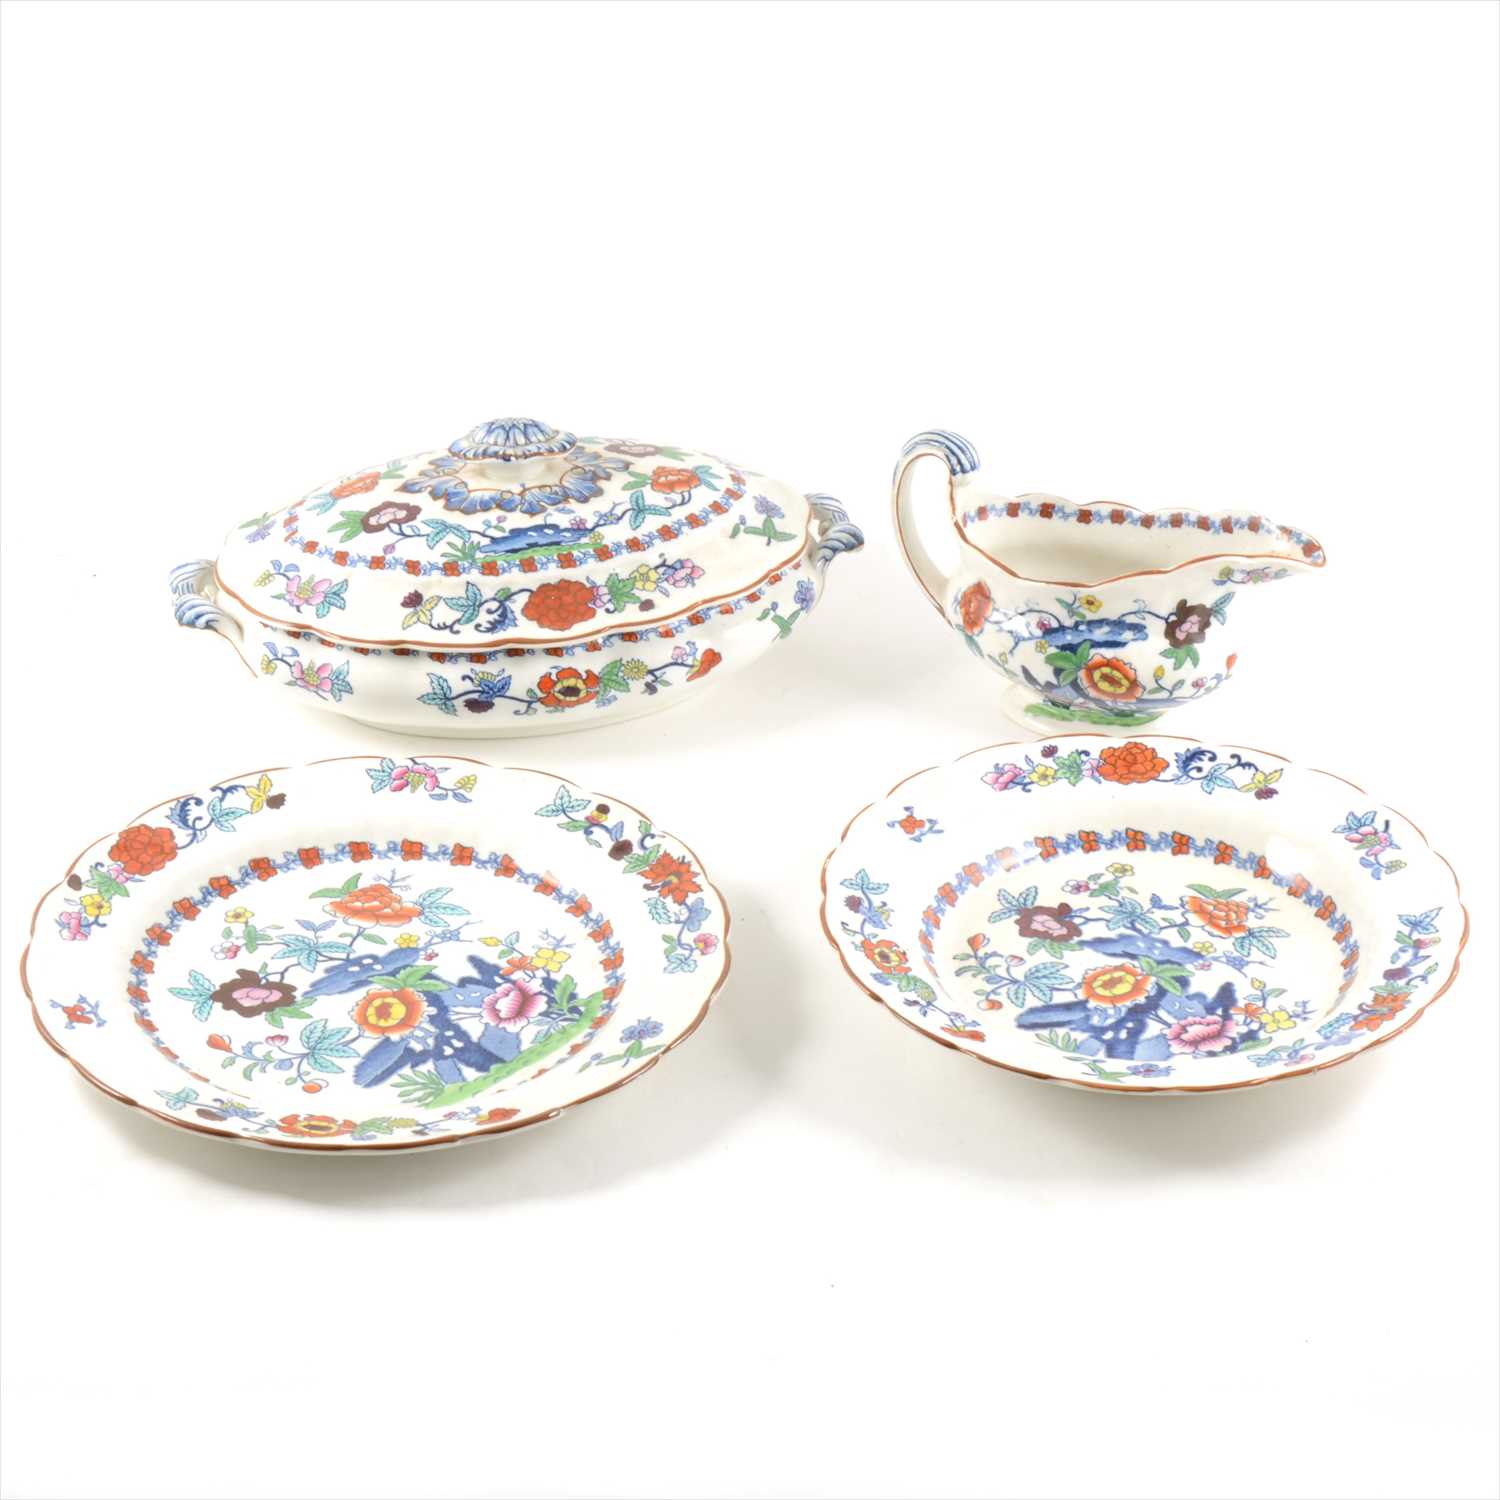 Lot 17 - Booths Silicon China part dinner service in The Pomadour design, and plated flatware